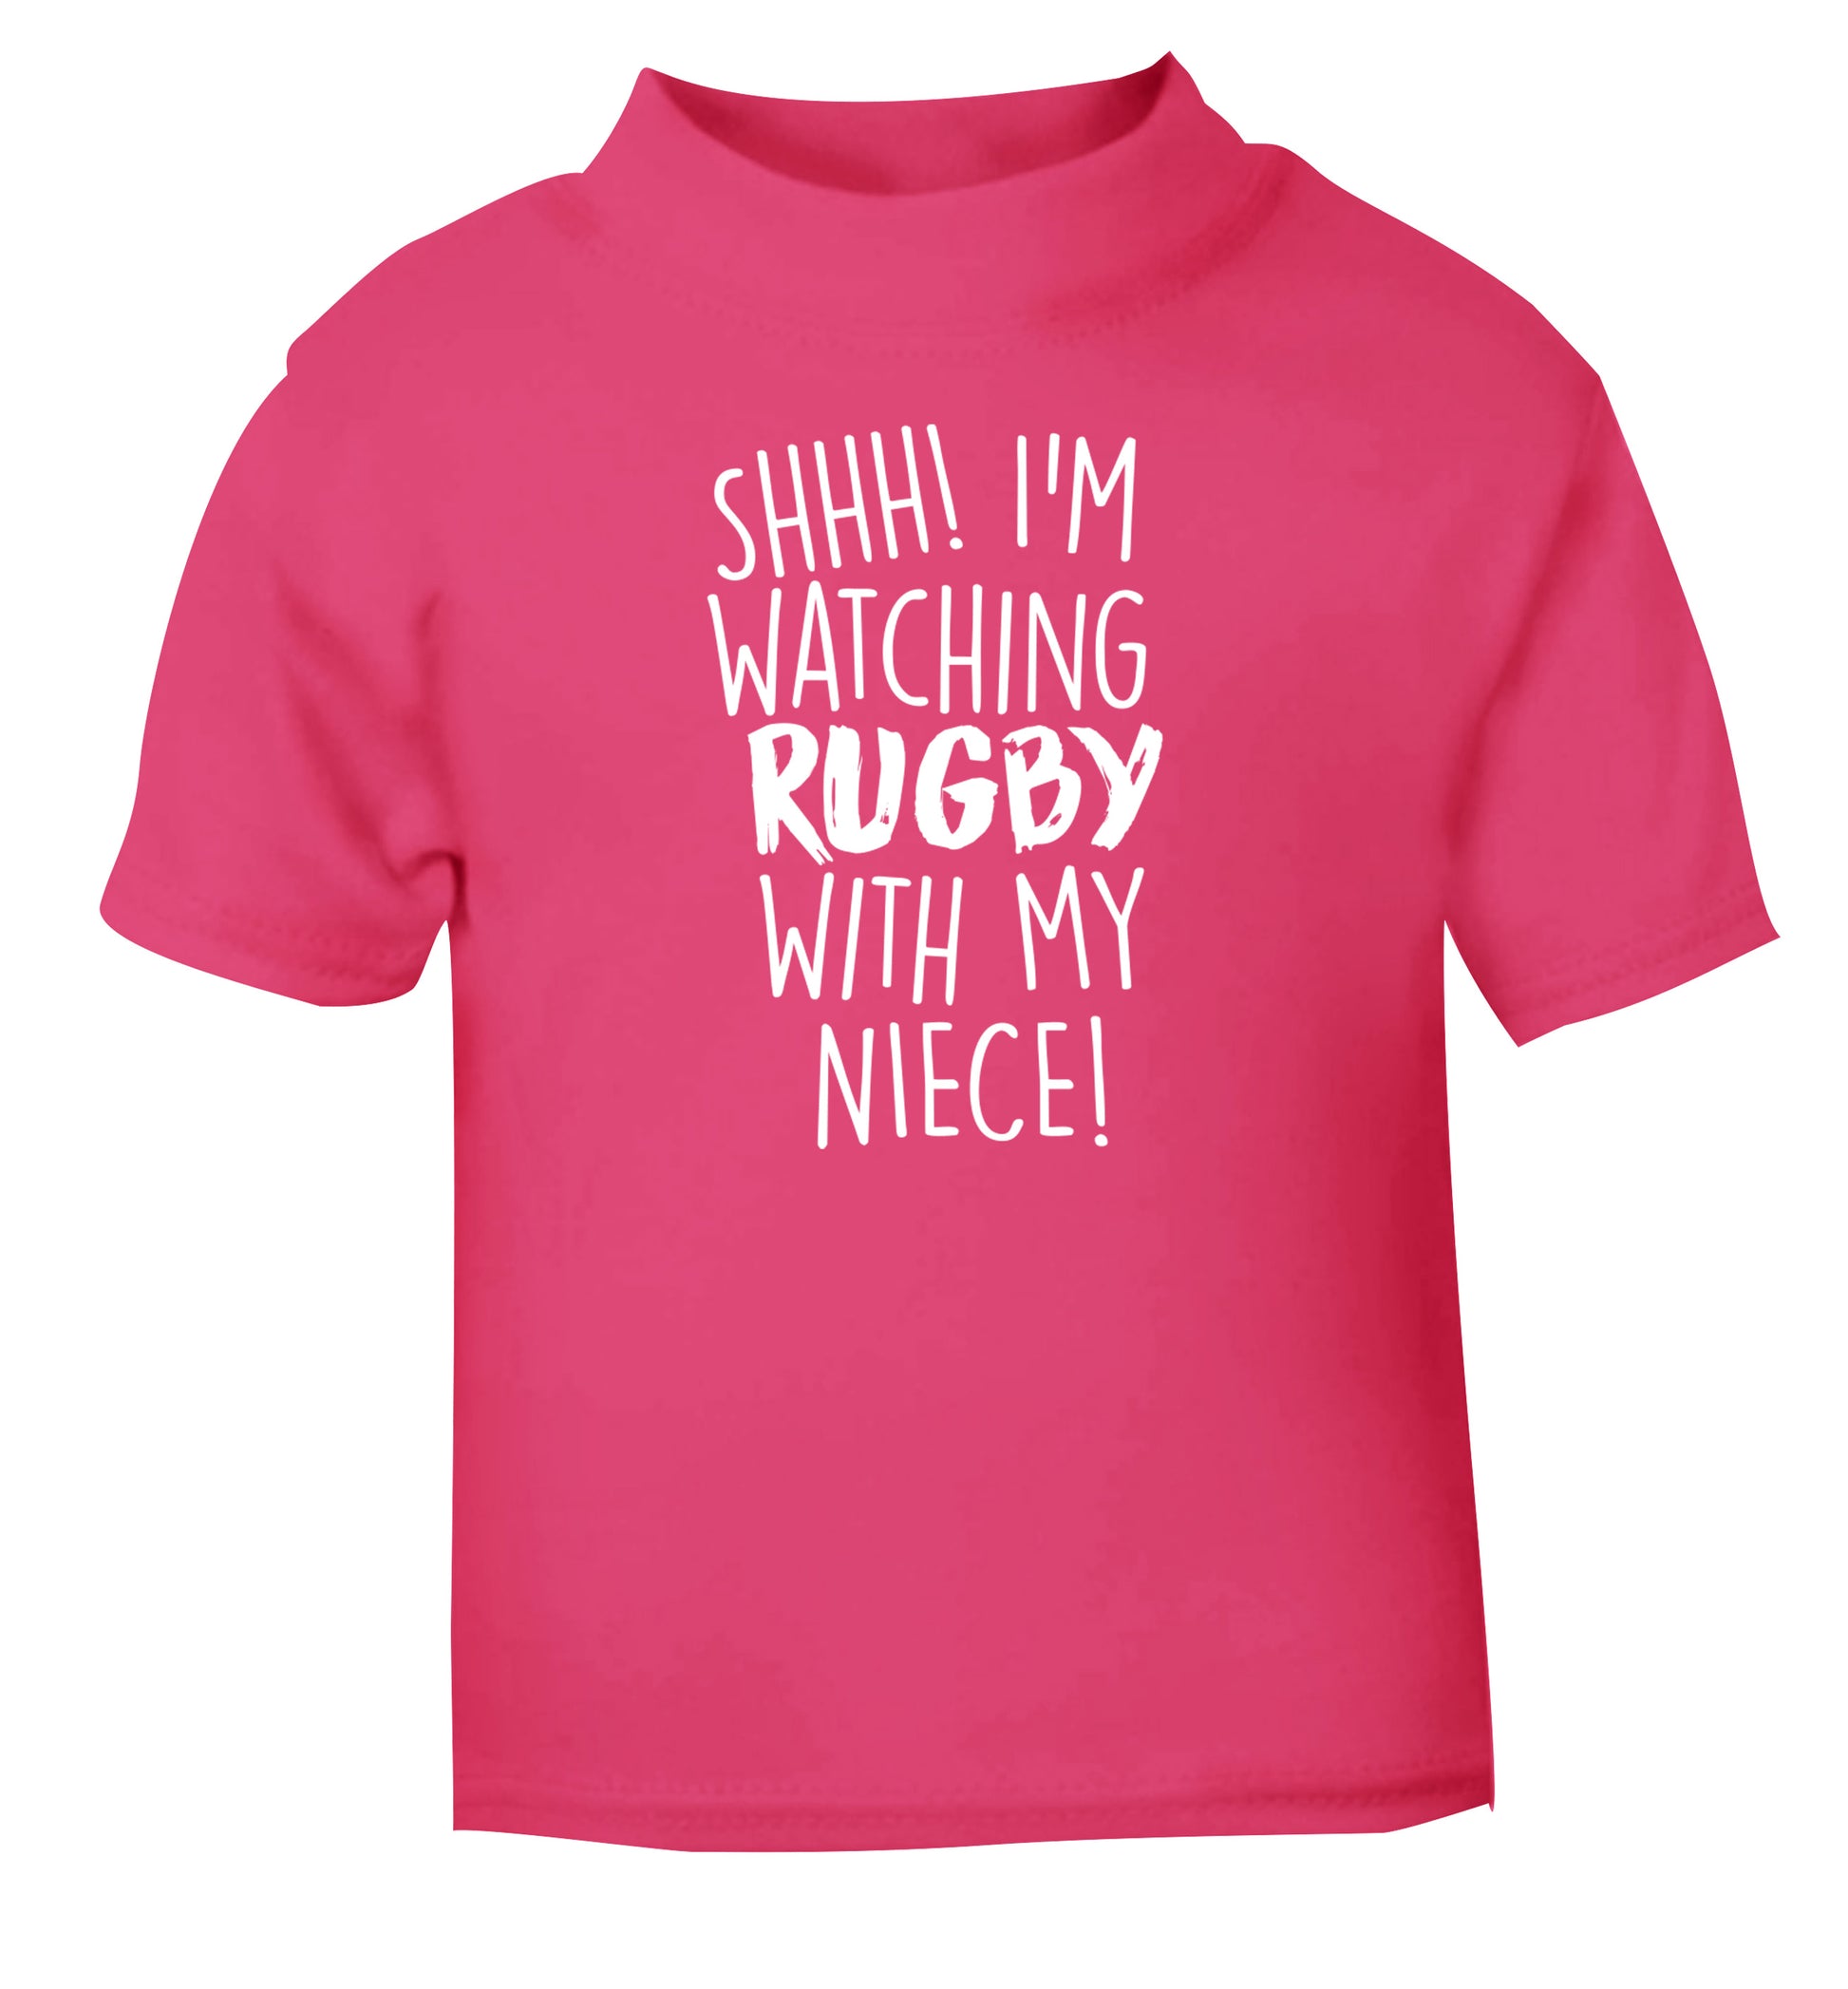 Shh.. I'm watching rugby with my niece pink Baby Toddler Tshirt 2 Years